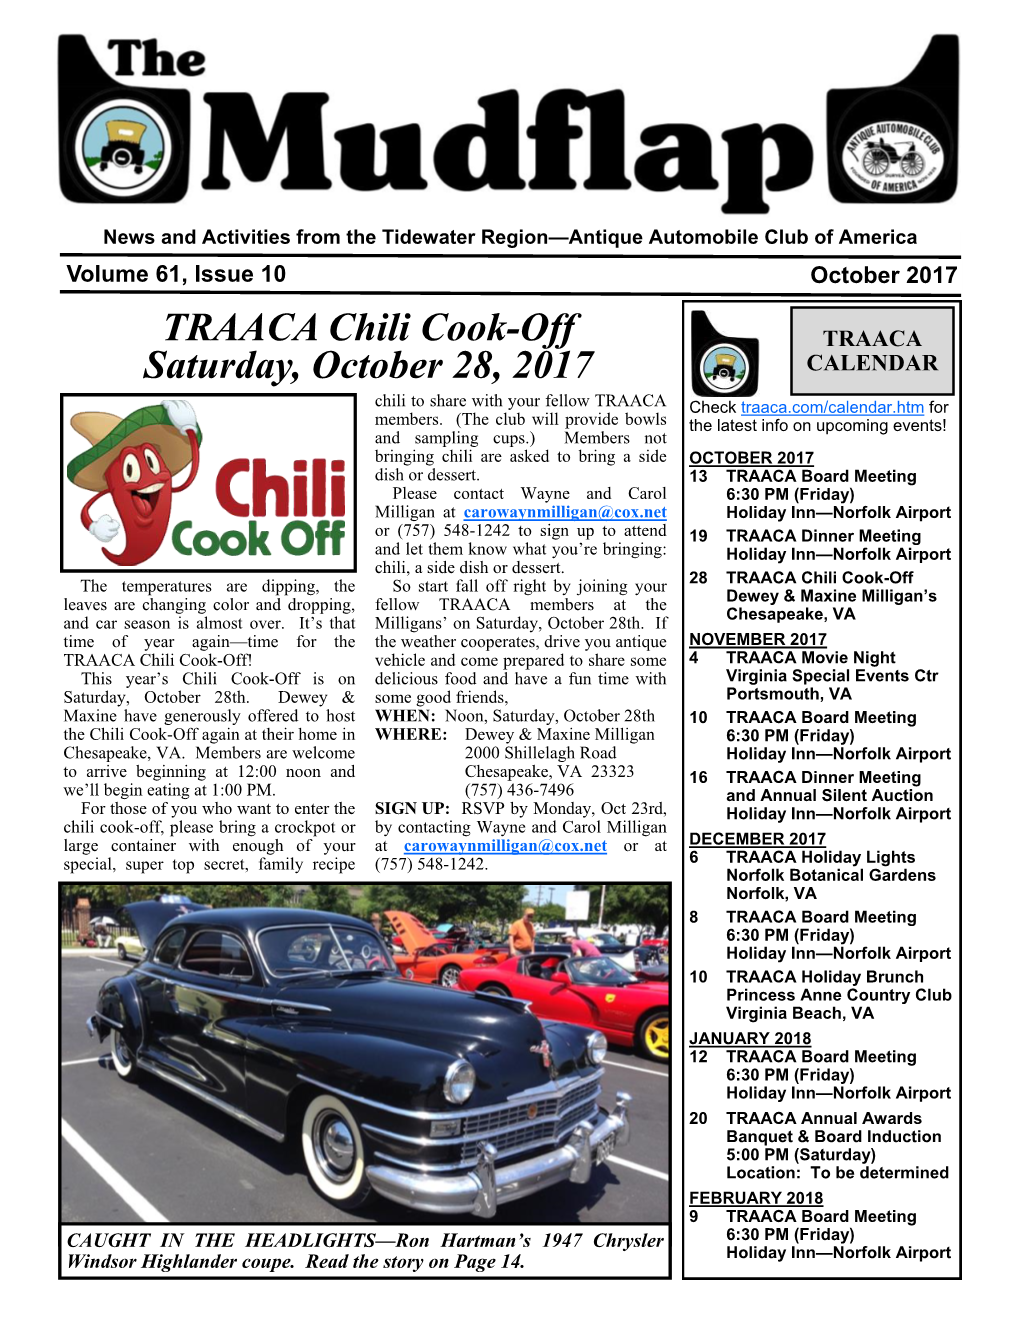 TRAACA Chili Cook-Off Saturday, October 28, 2017